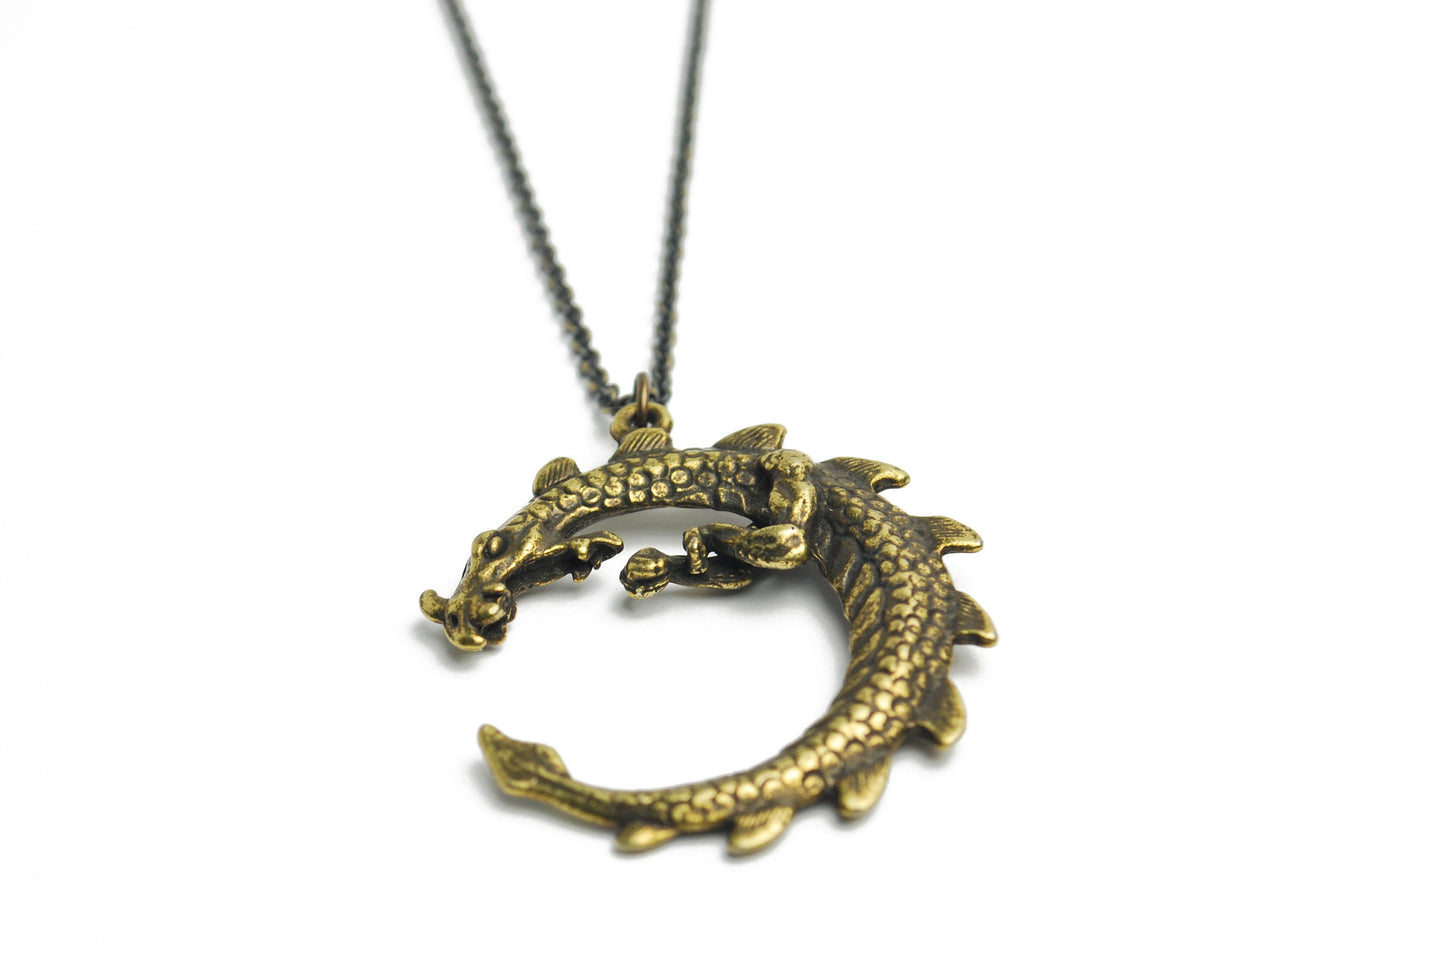 Large Serpent Dragon Necklace in Antique Brass